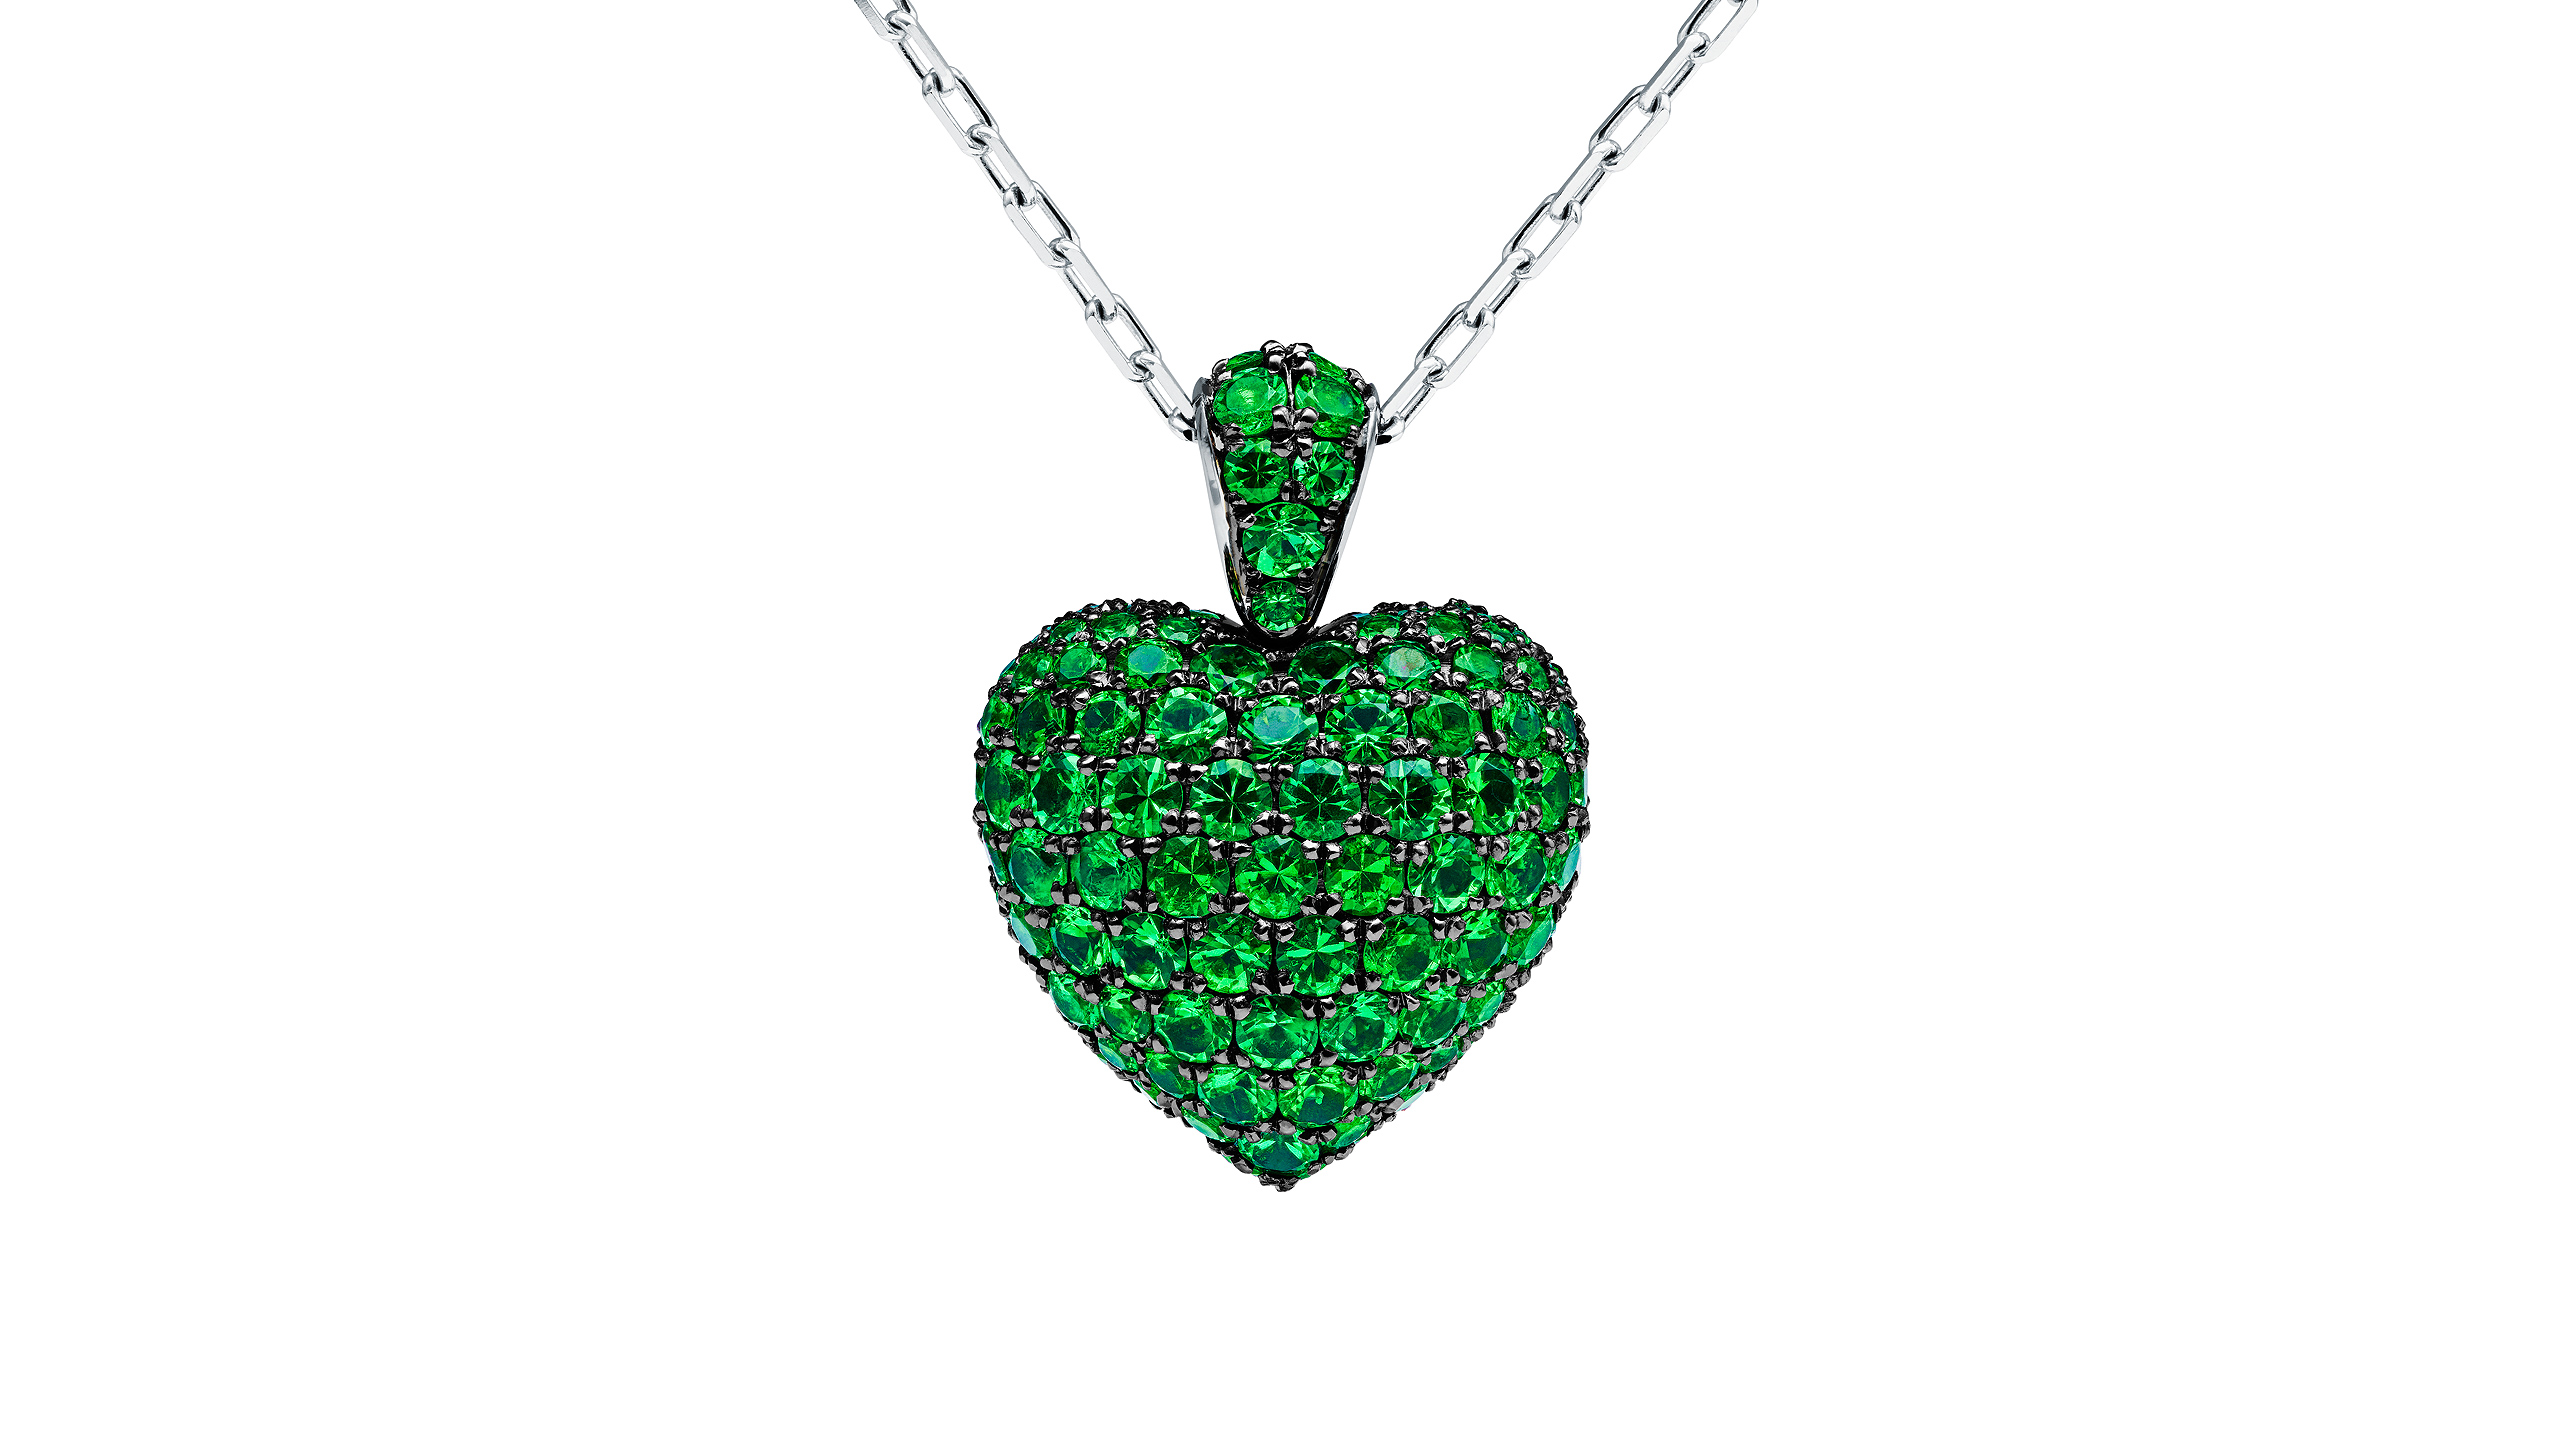 https://towejewels.com/wp-content/uploads/2015/05/emerald_heart_small_ny_OK_2560x1440_overview_web.jpg